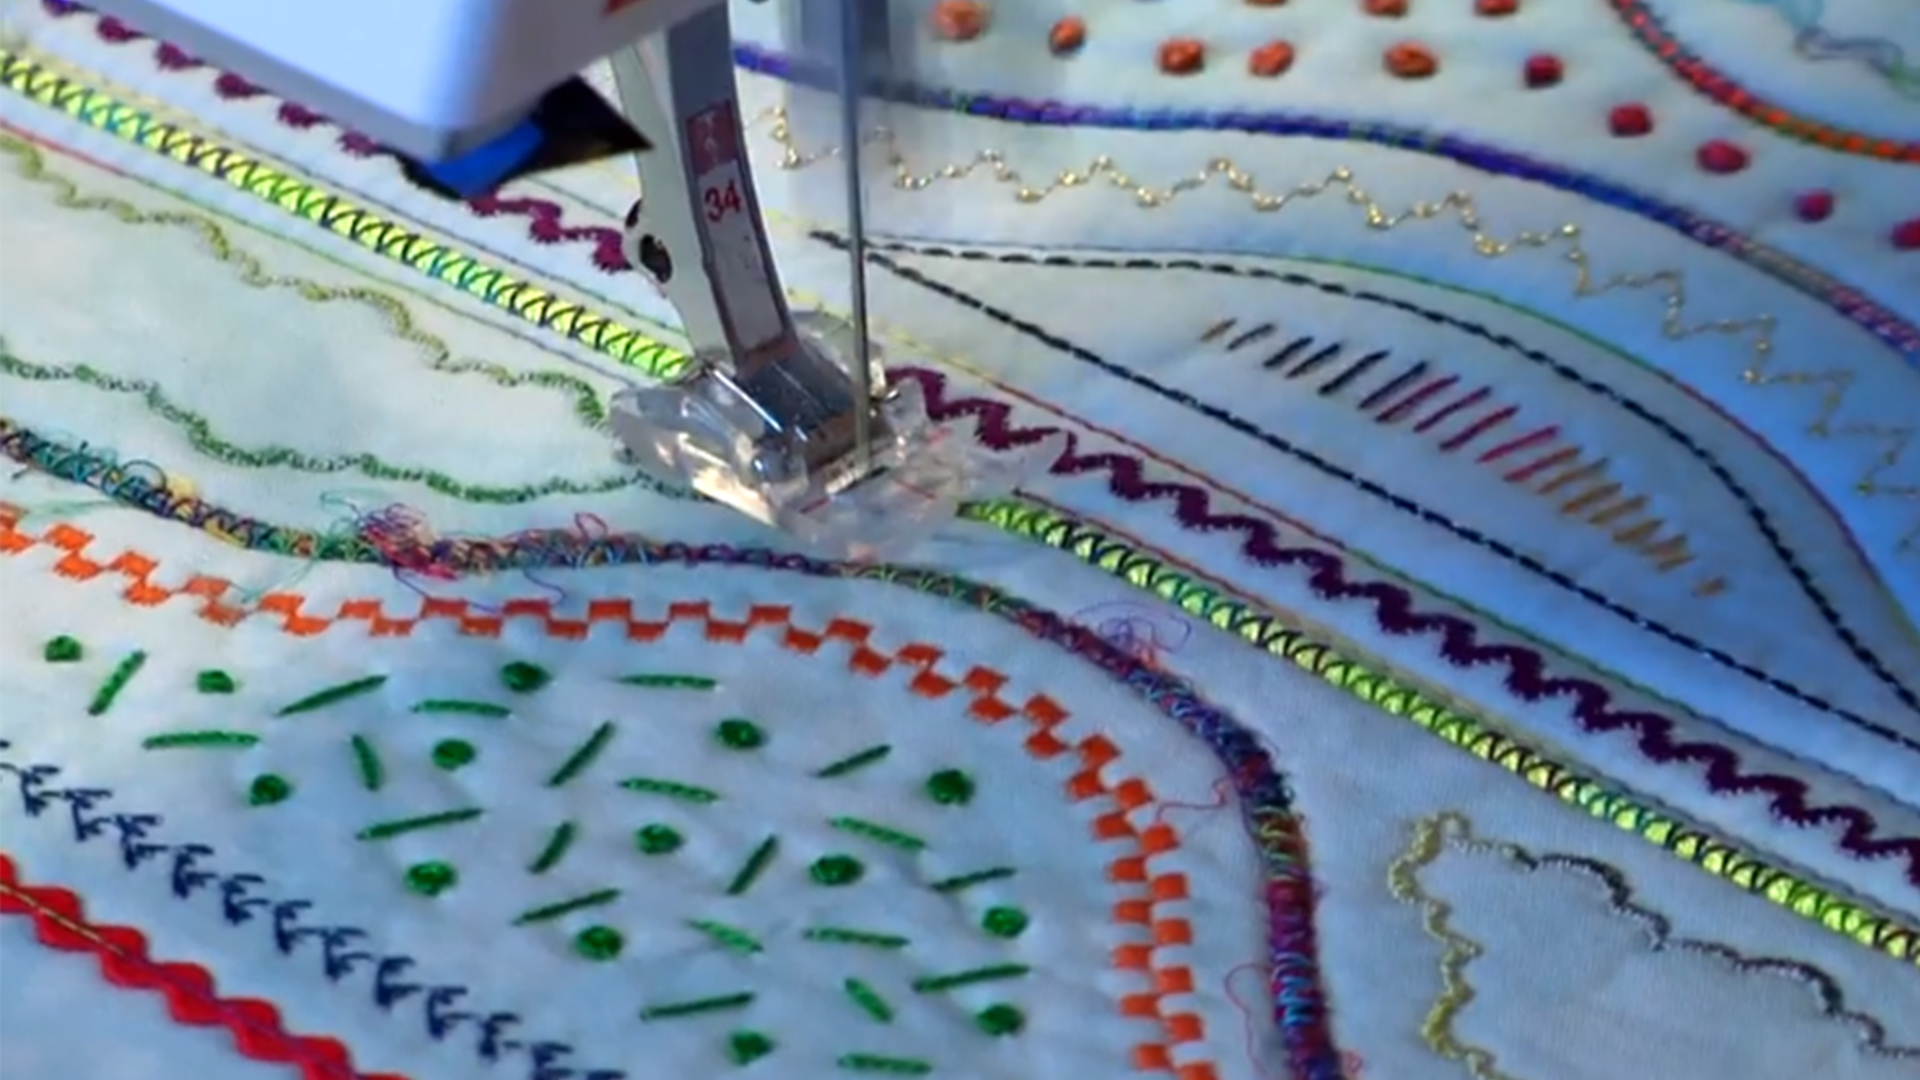 Stupendous Stitching: Adventures in Surface Design